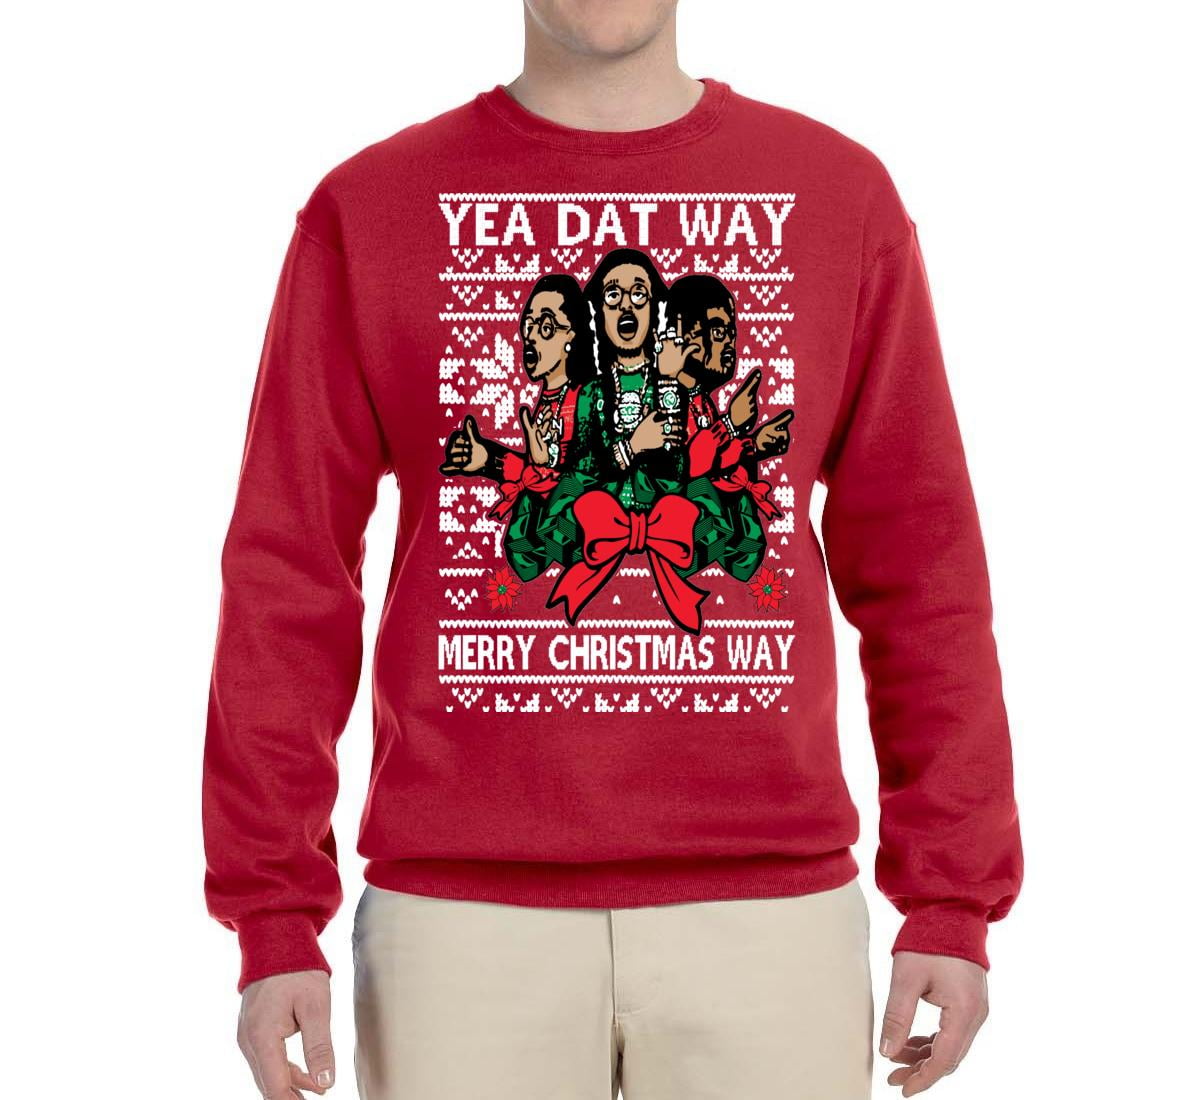 Migos We from the North Ugly Christmas Sweater Yeah Dat way Quavo Sweatshirt NEW